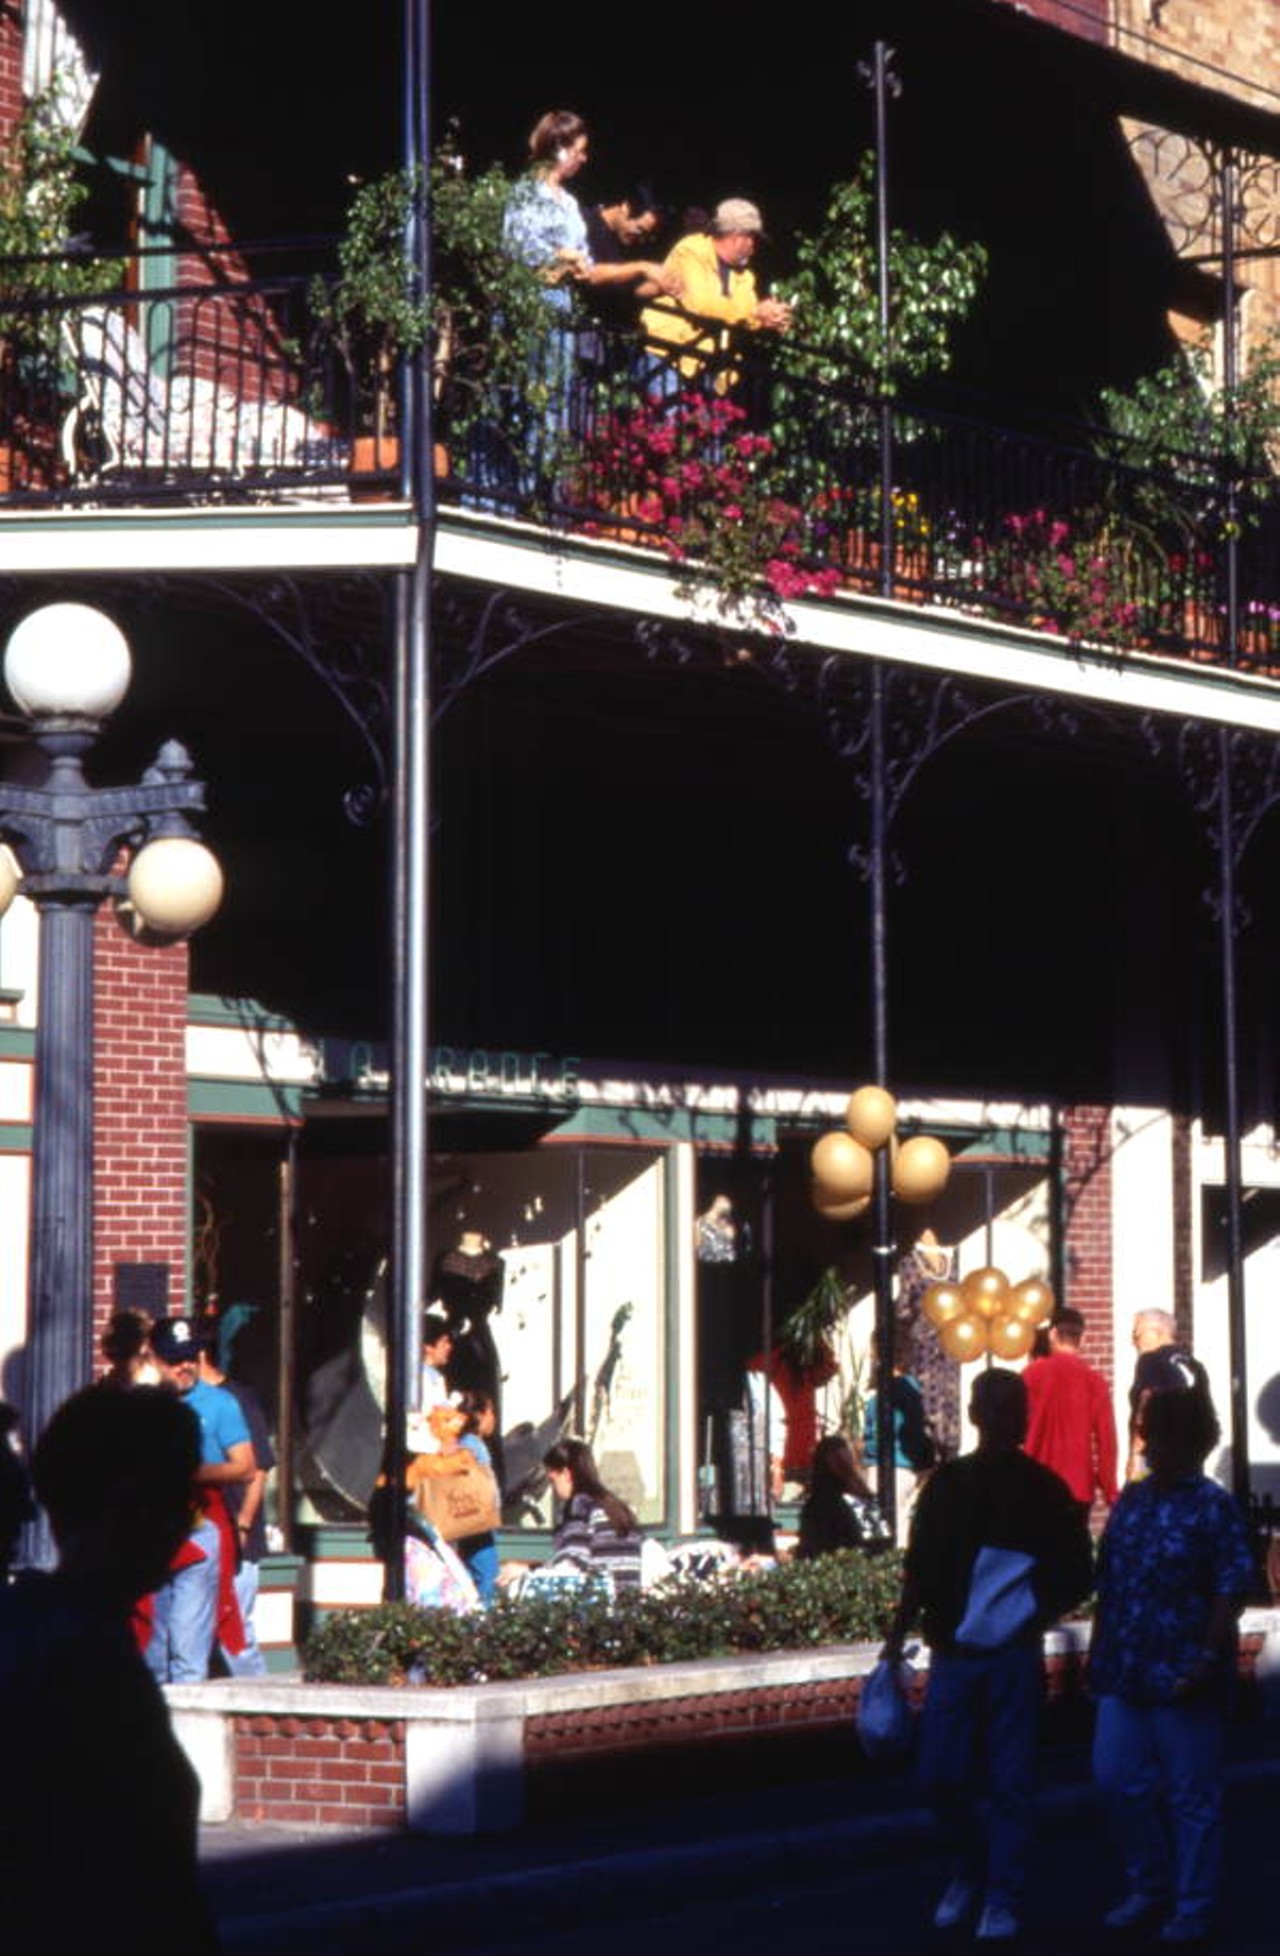 People strolling by the La France clothing store on Fiesta Day in Ybor City (1969).